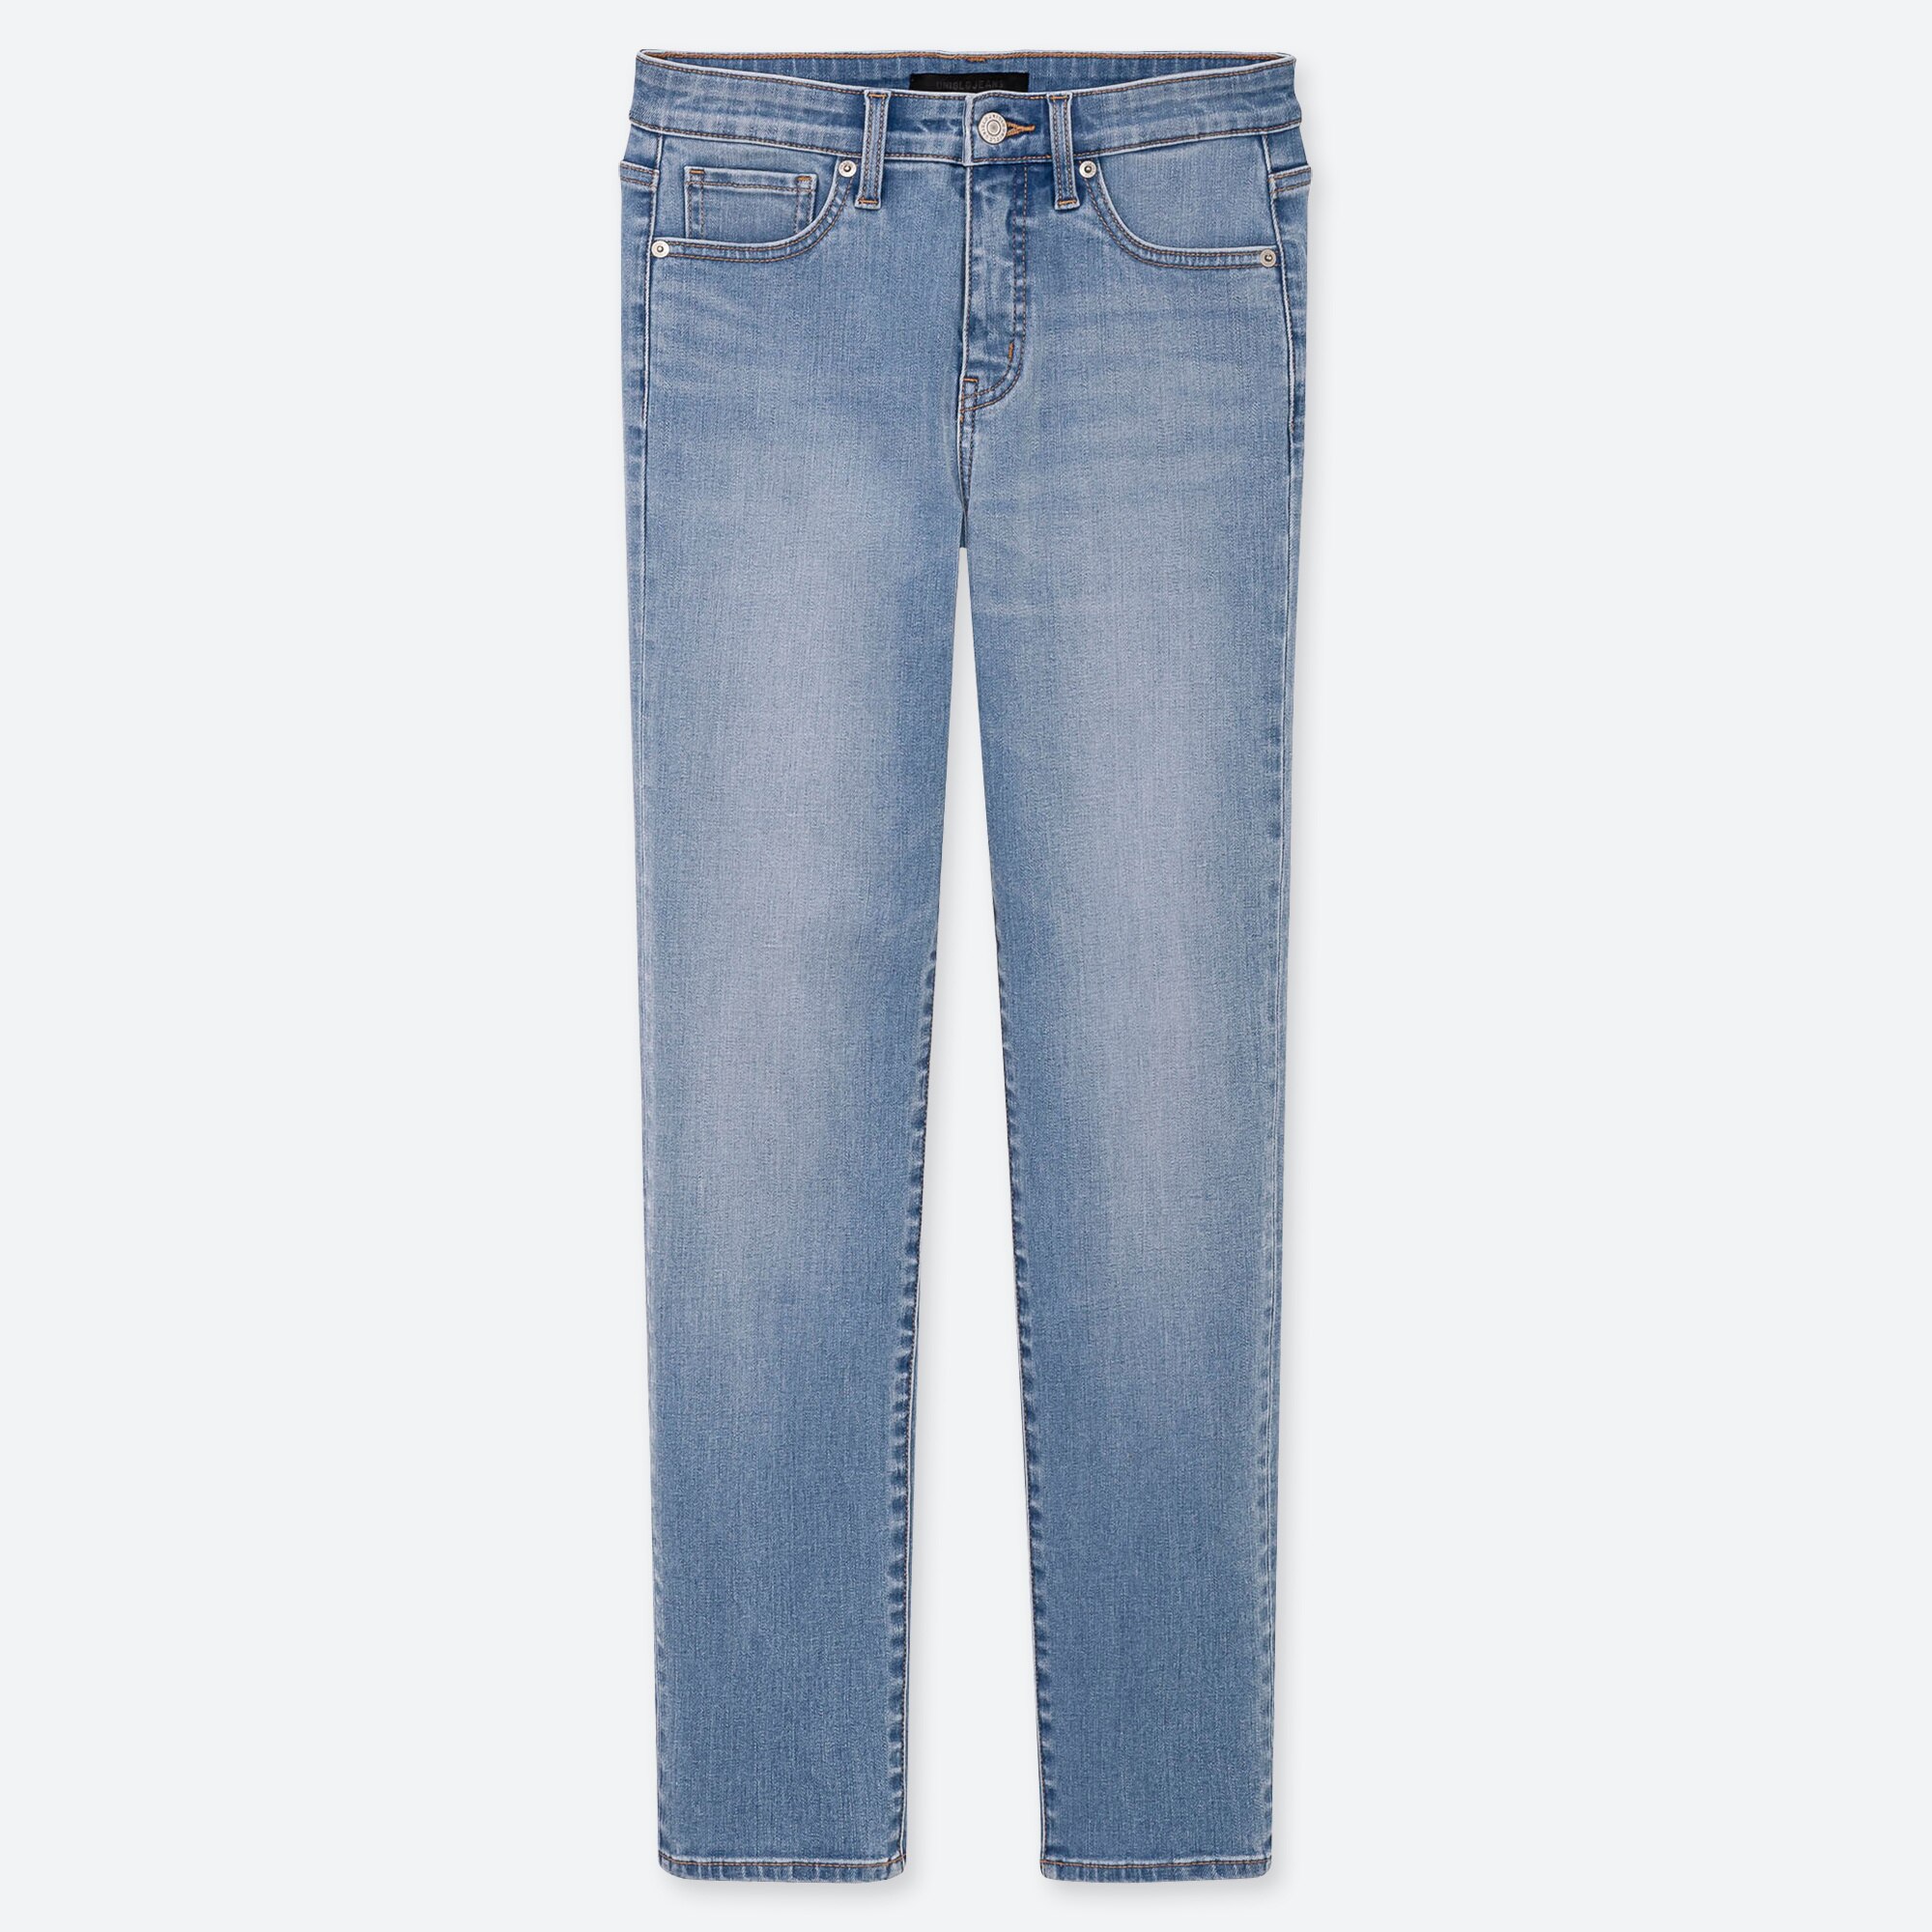 skinny fit ankle length jeans